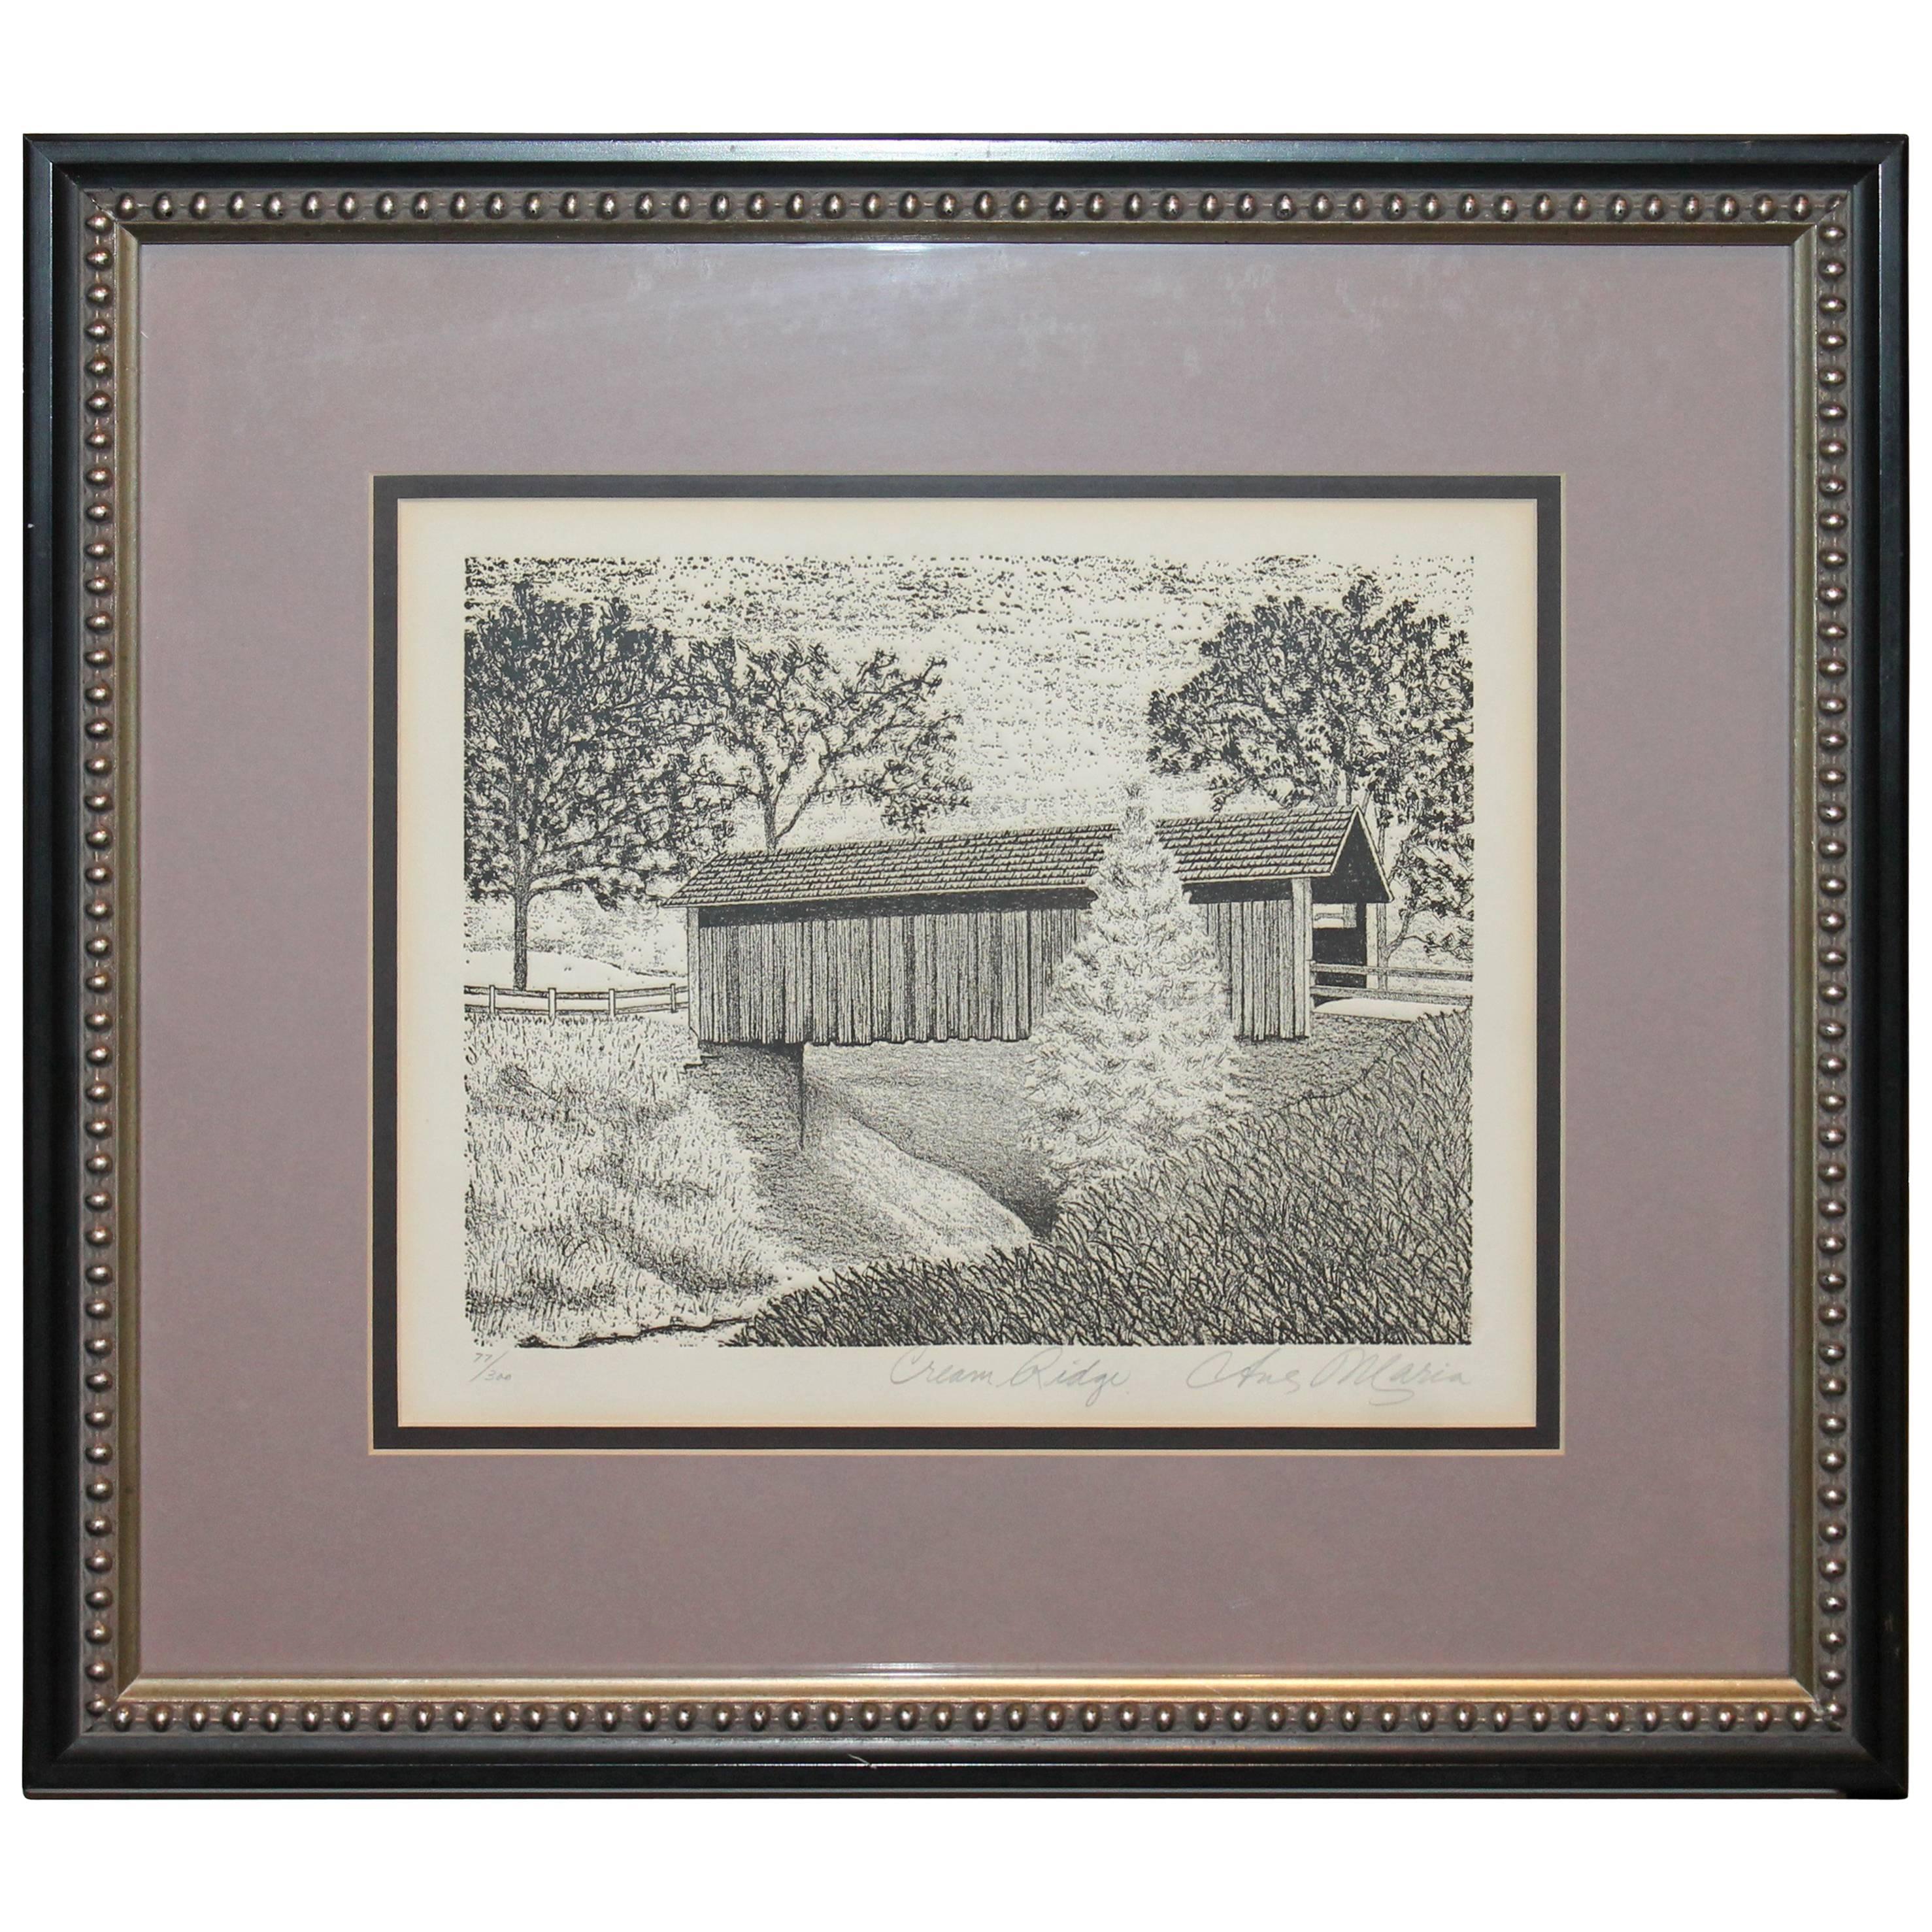 Original Signed and Numbered Etching of Cream Ridge, New Jersey